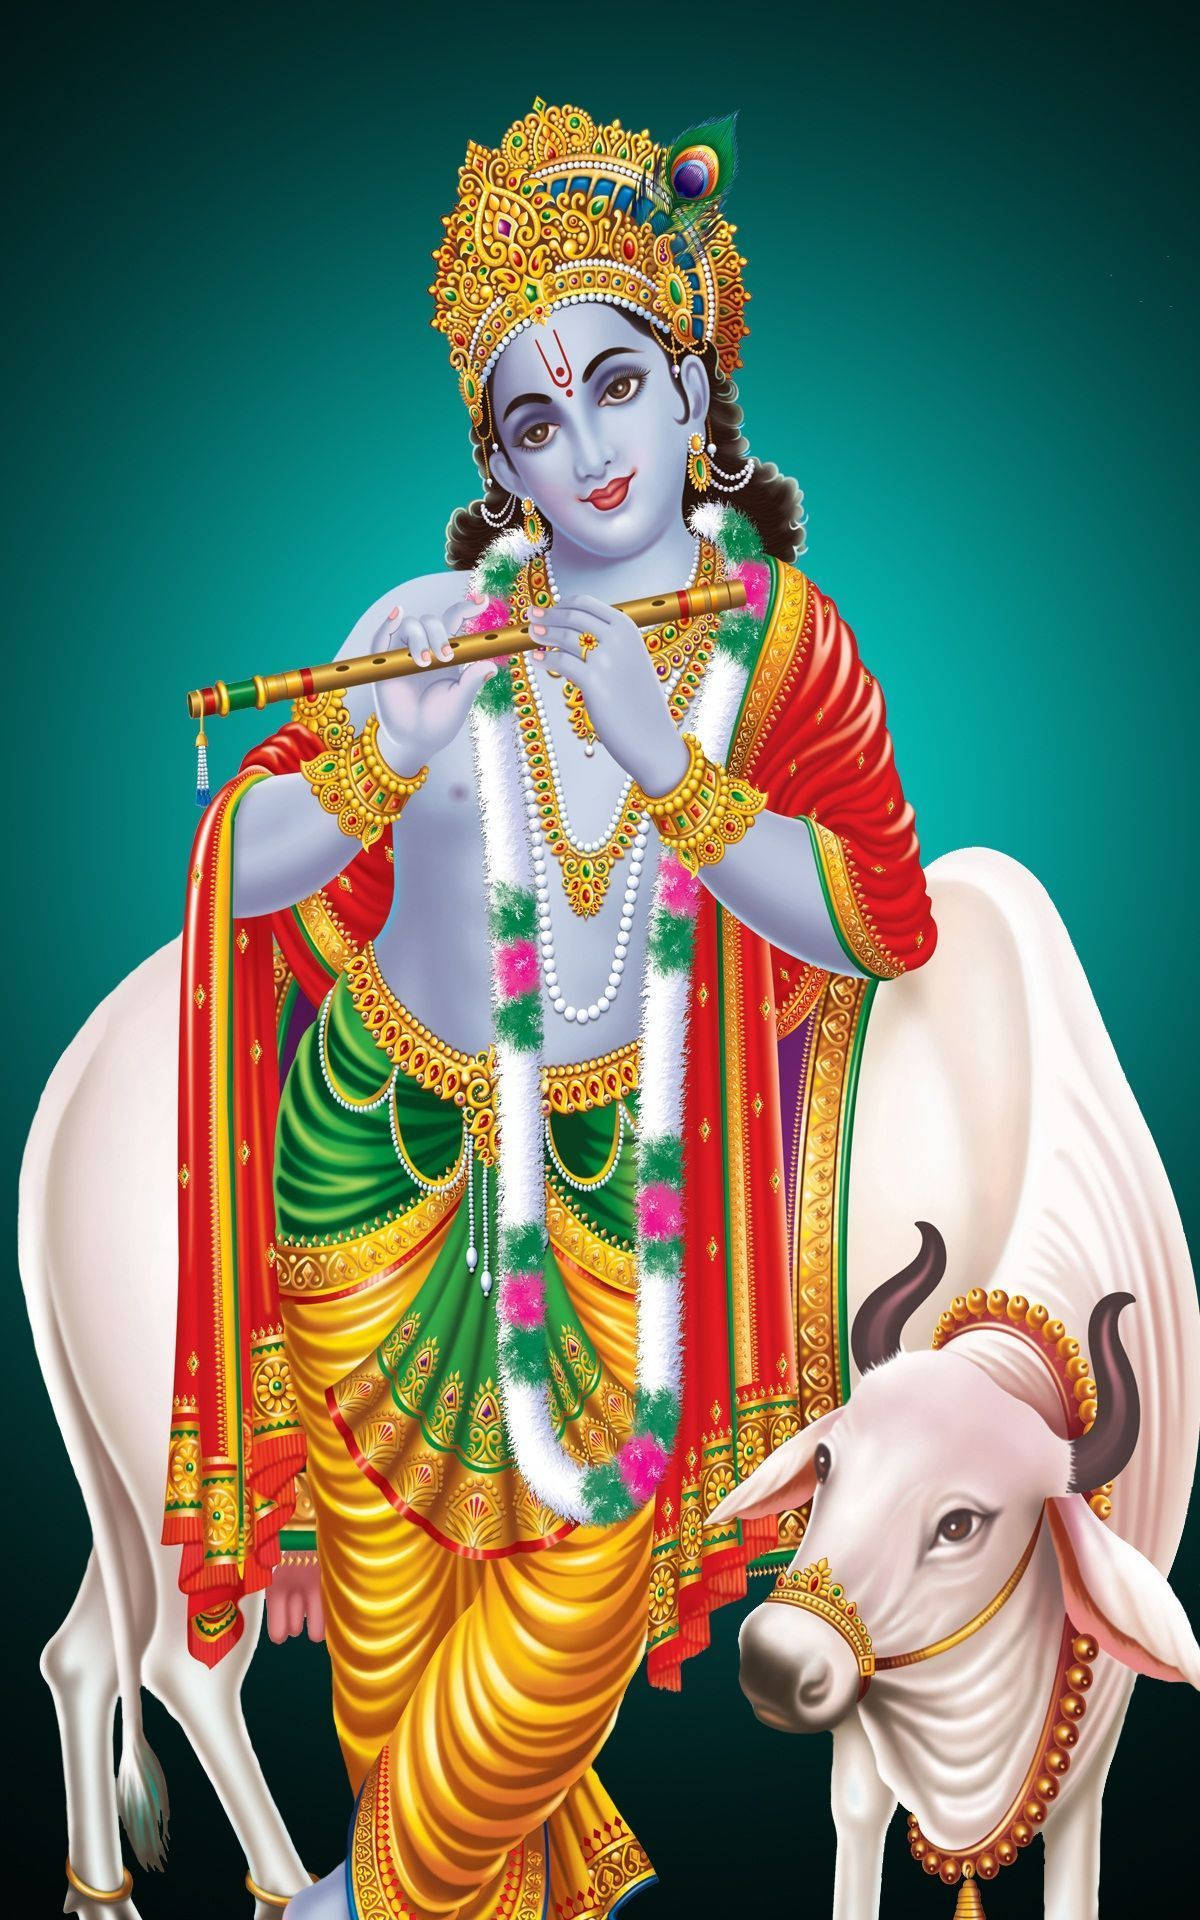 Divine Krishna With Sacred Cow - Mobile Phone Wallpaper Background